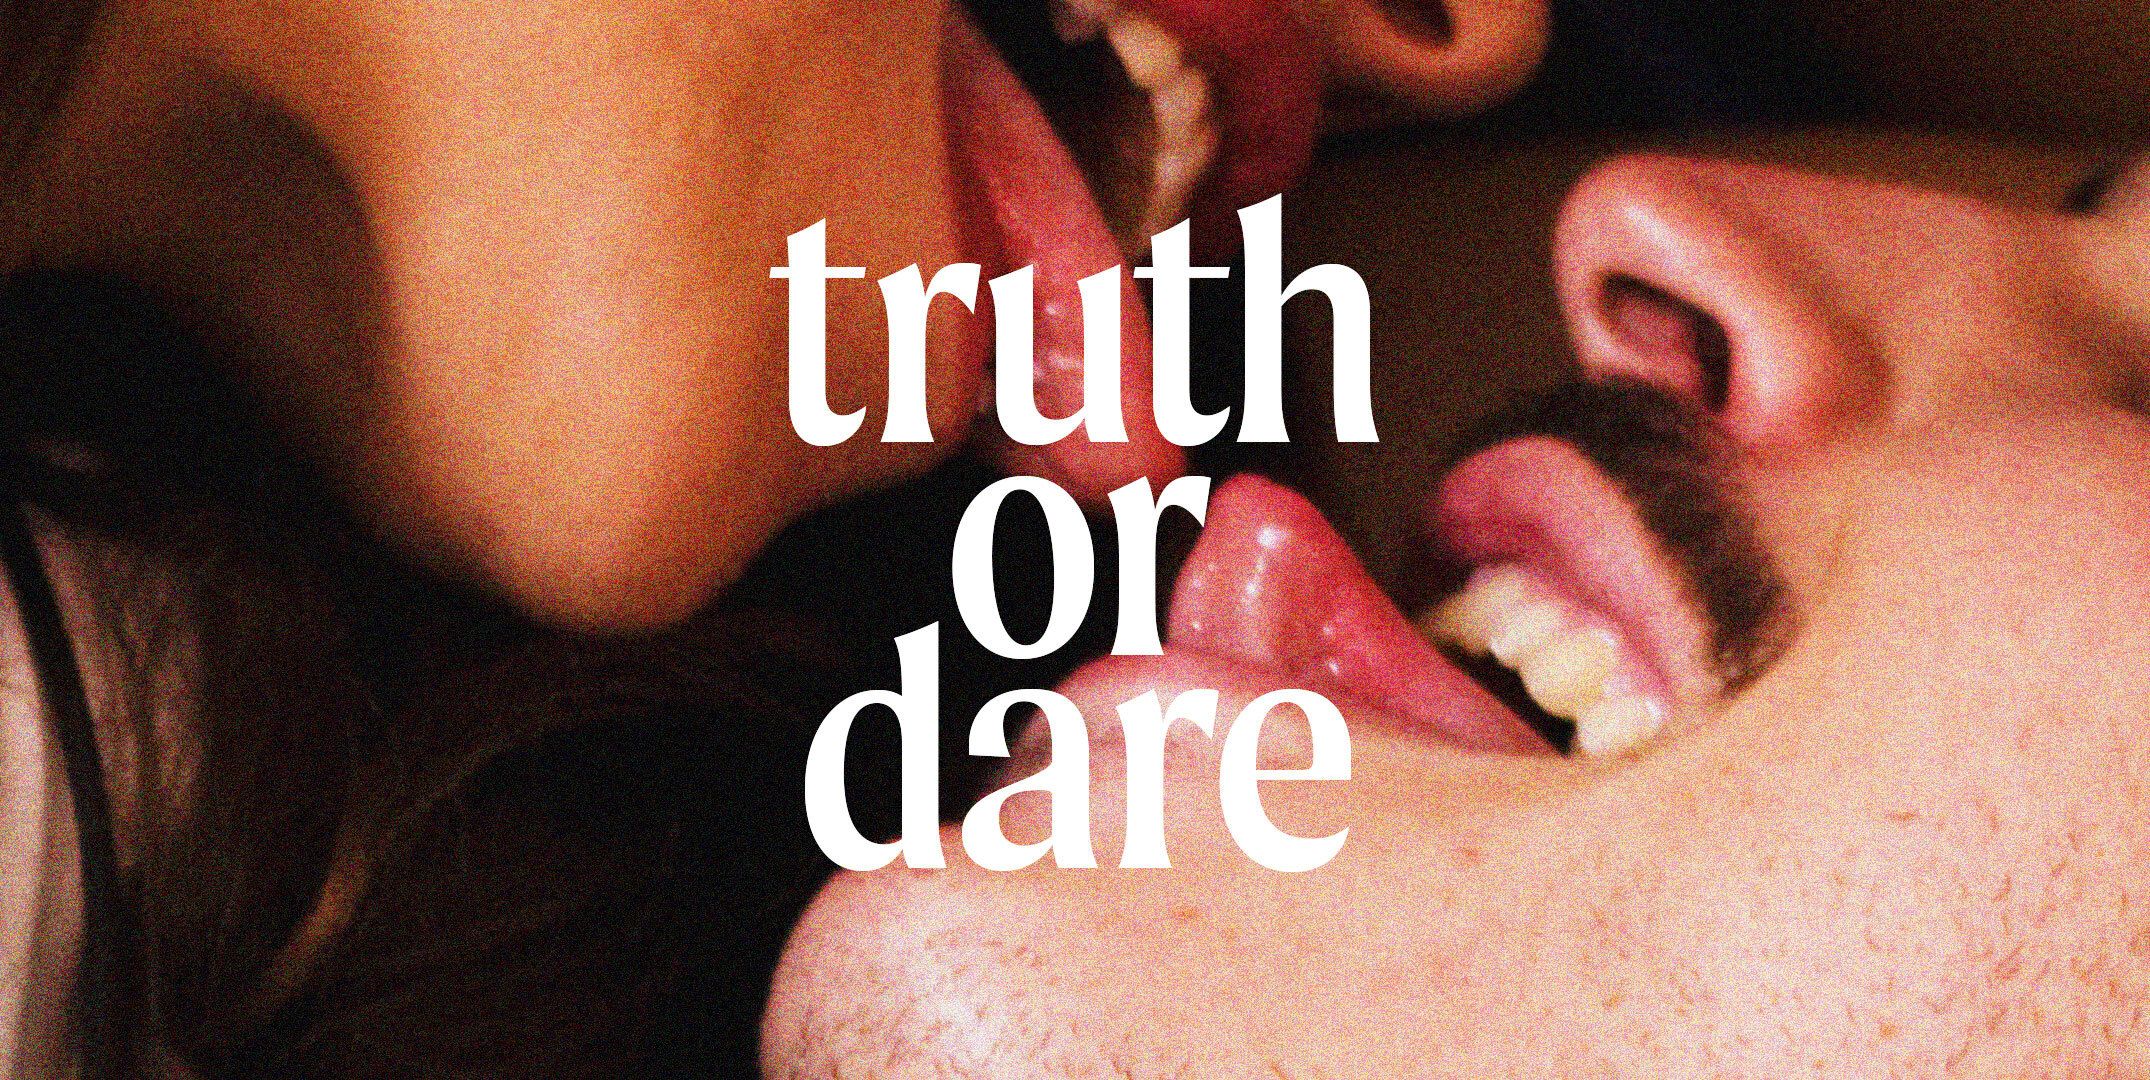 Truth or dare turns sexual fast